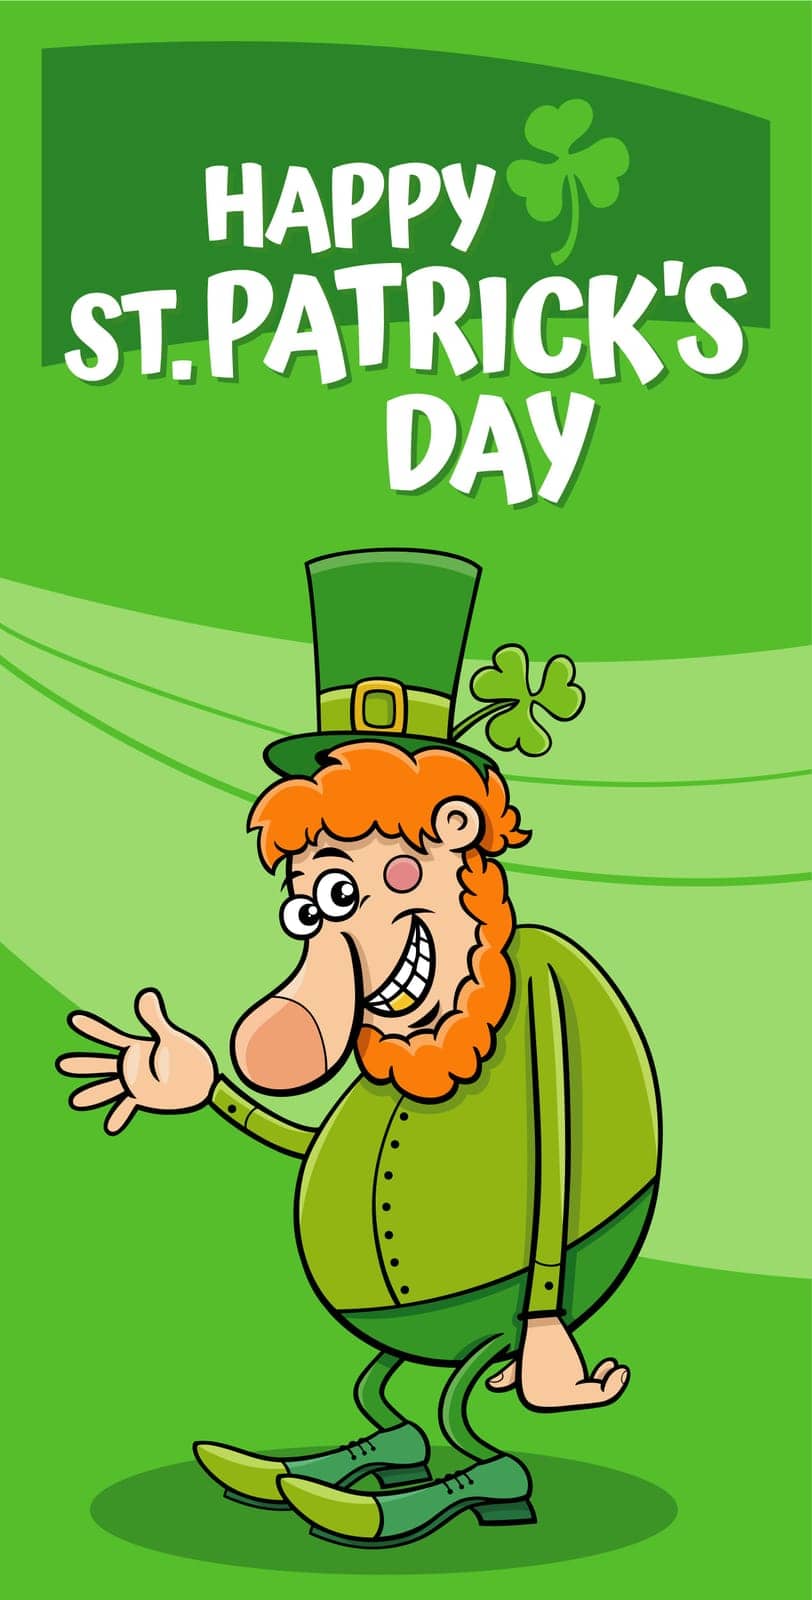 Cartoon illustration of Saint Patrick Day design with Leprechaun character with clover